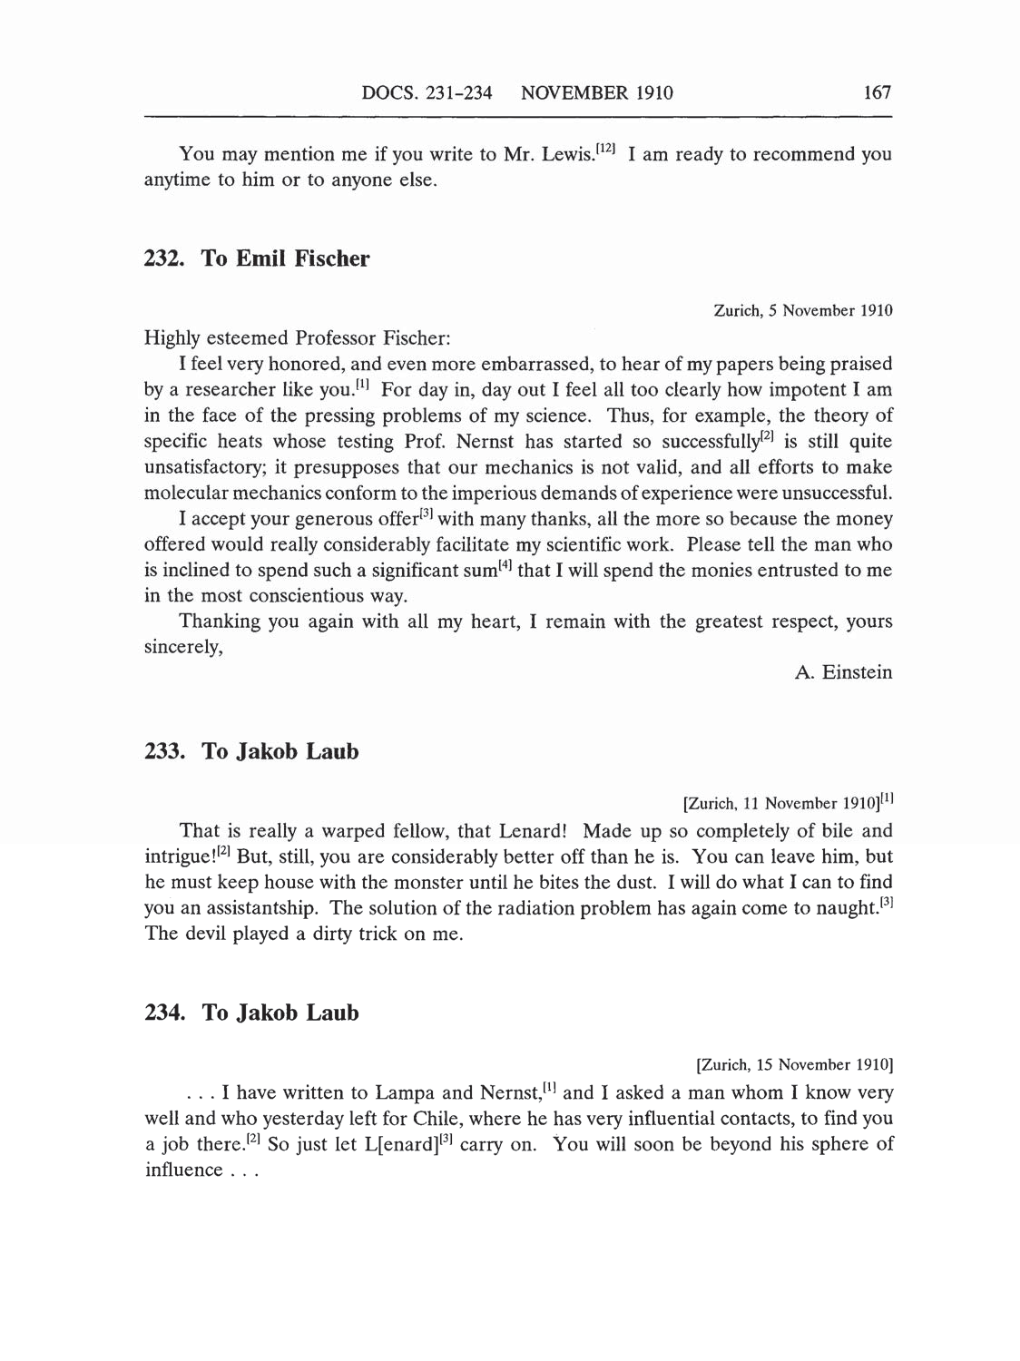 Volume 5: The Swiss Years: Correspondence, 1902-1914 (English translation supplement) page 167